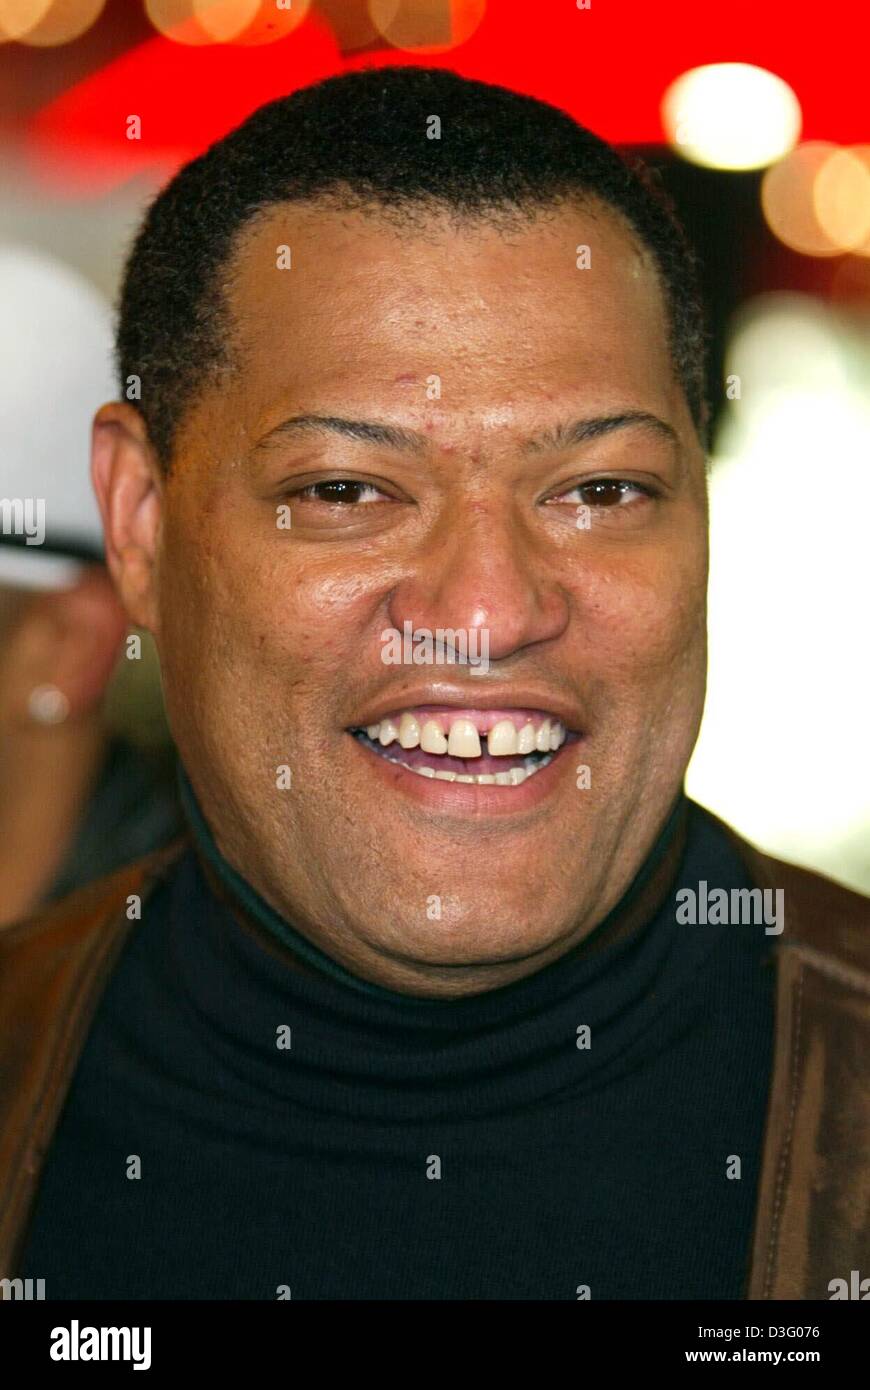 dpa-the-us-actor-lawrence-fishburne-the-matrix-smiles-ahead-of-the-D3G076.jpg